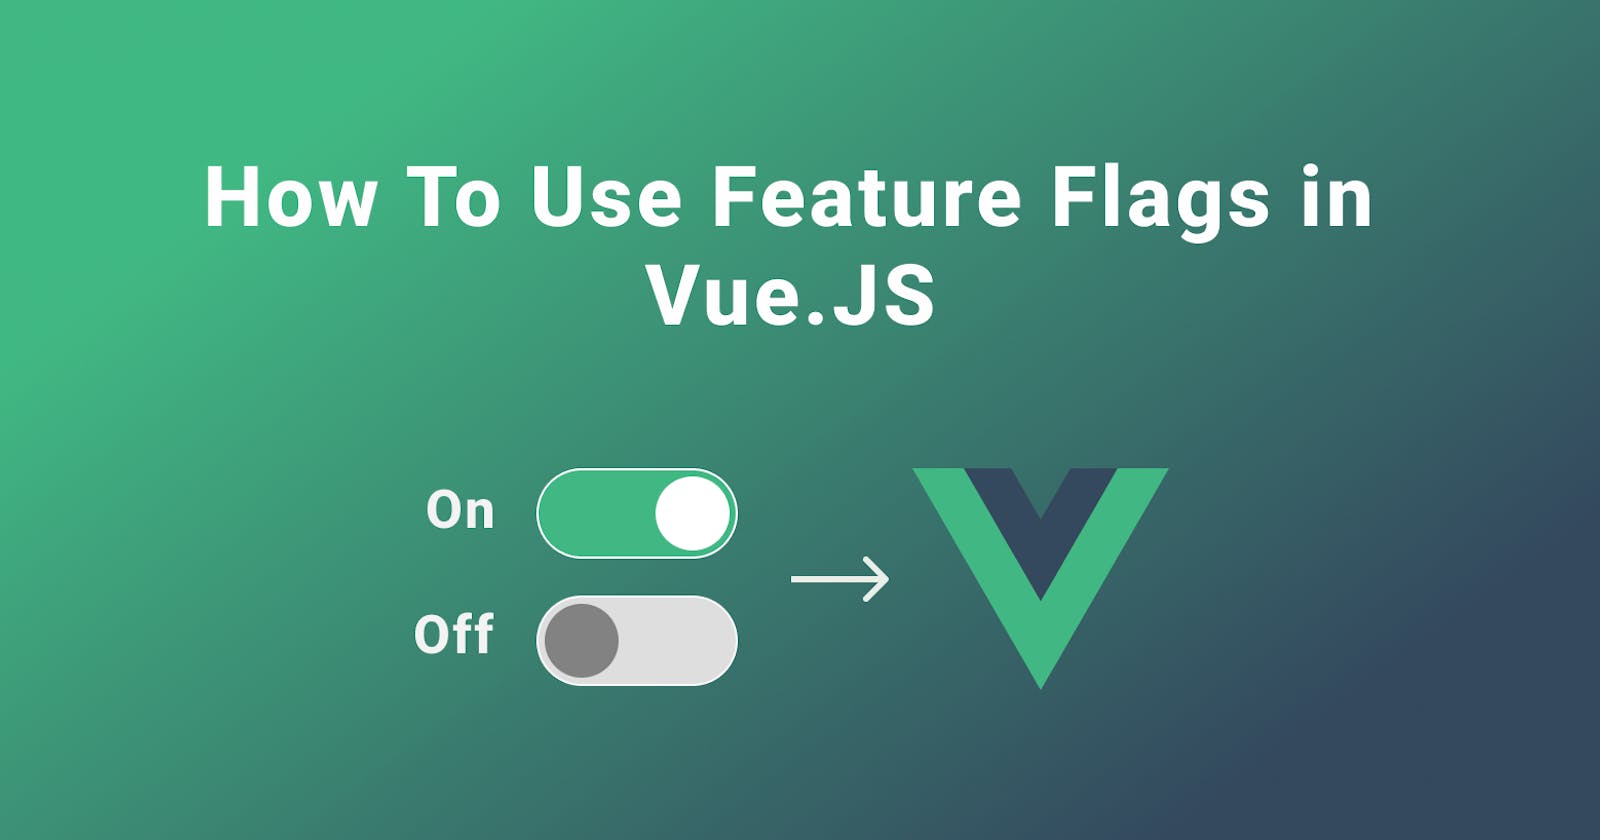 How To Use Feature Flags in Vue.JS